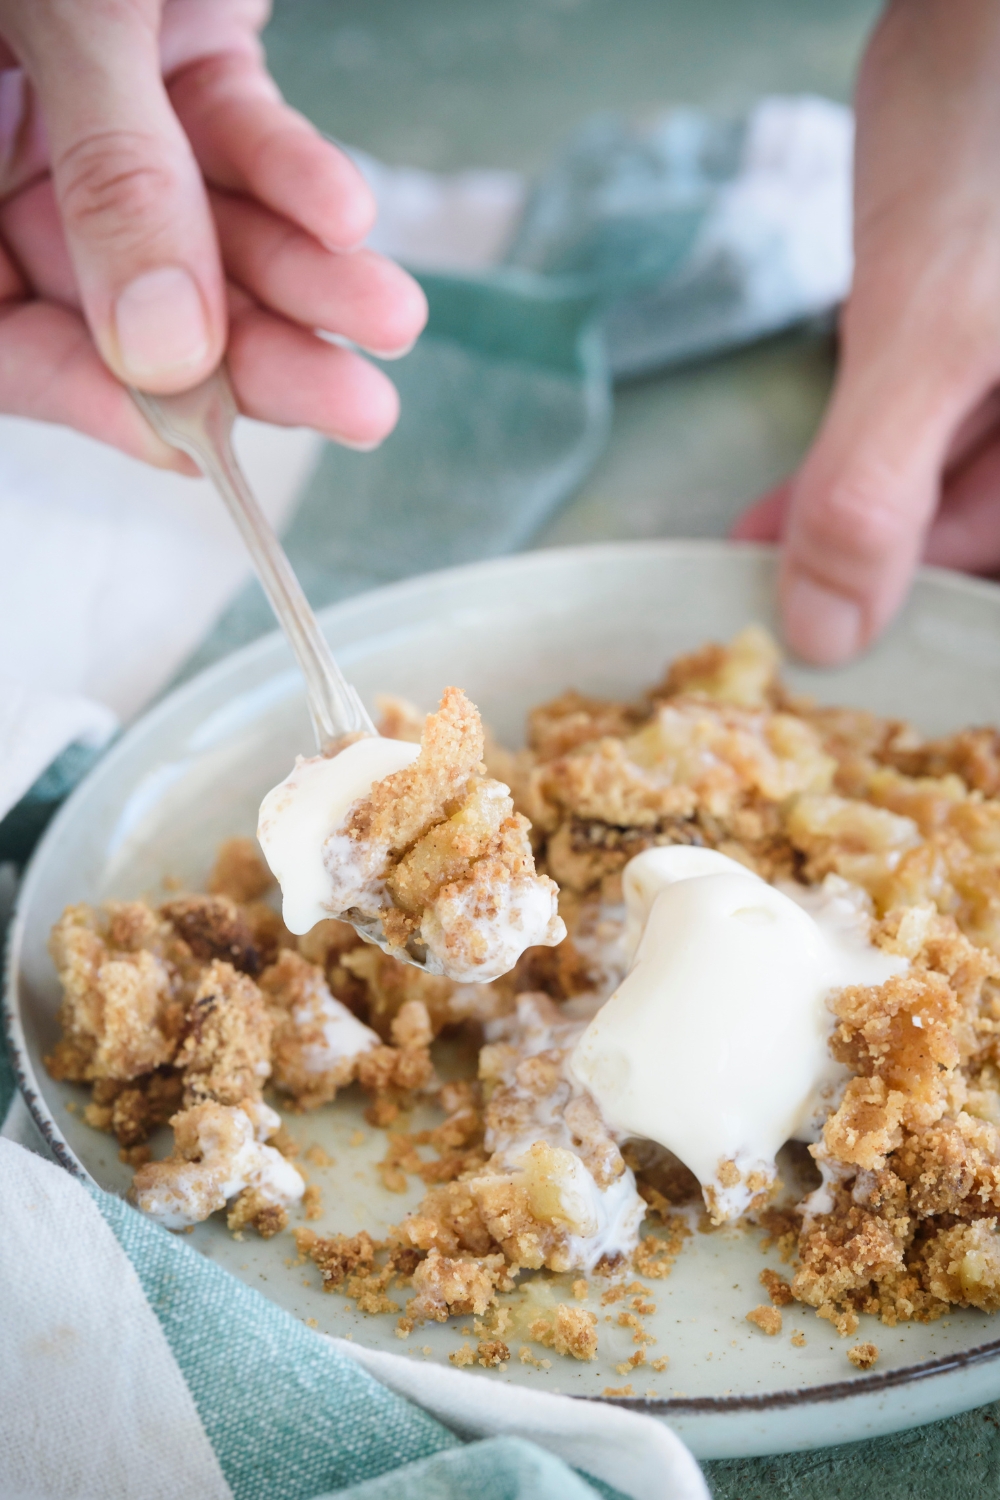 A spoonful of apple crumble with vanilla ice cream dripping off the fork. The spoon is held above the plate filled with more apple crumble.